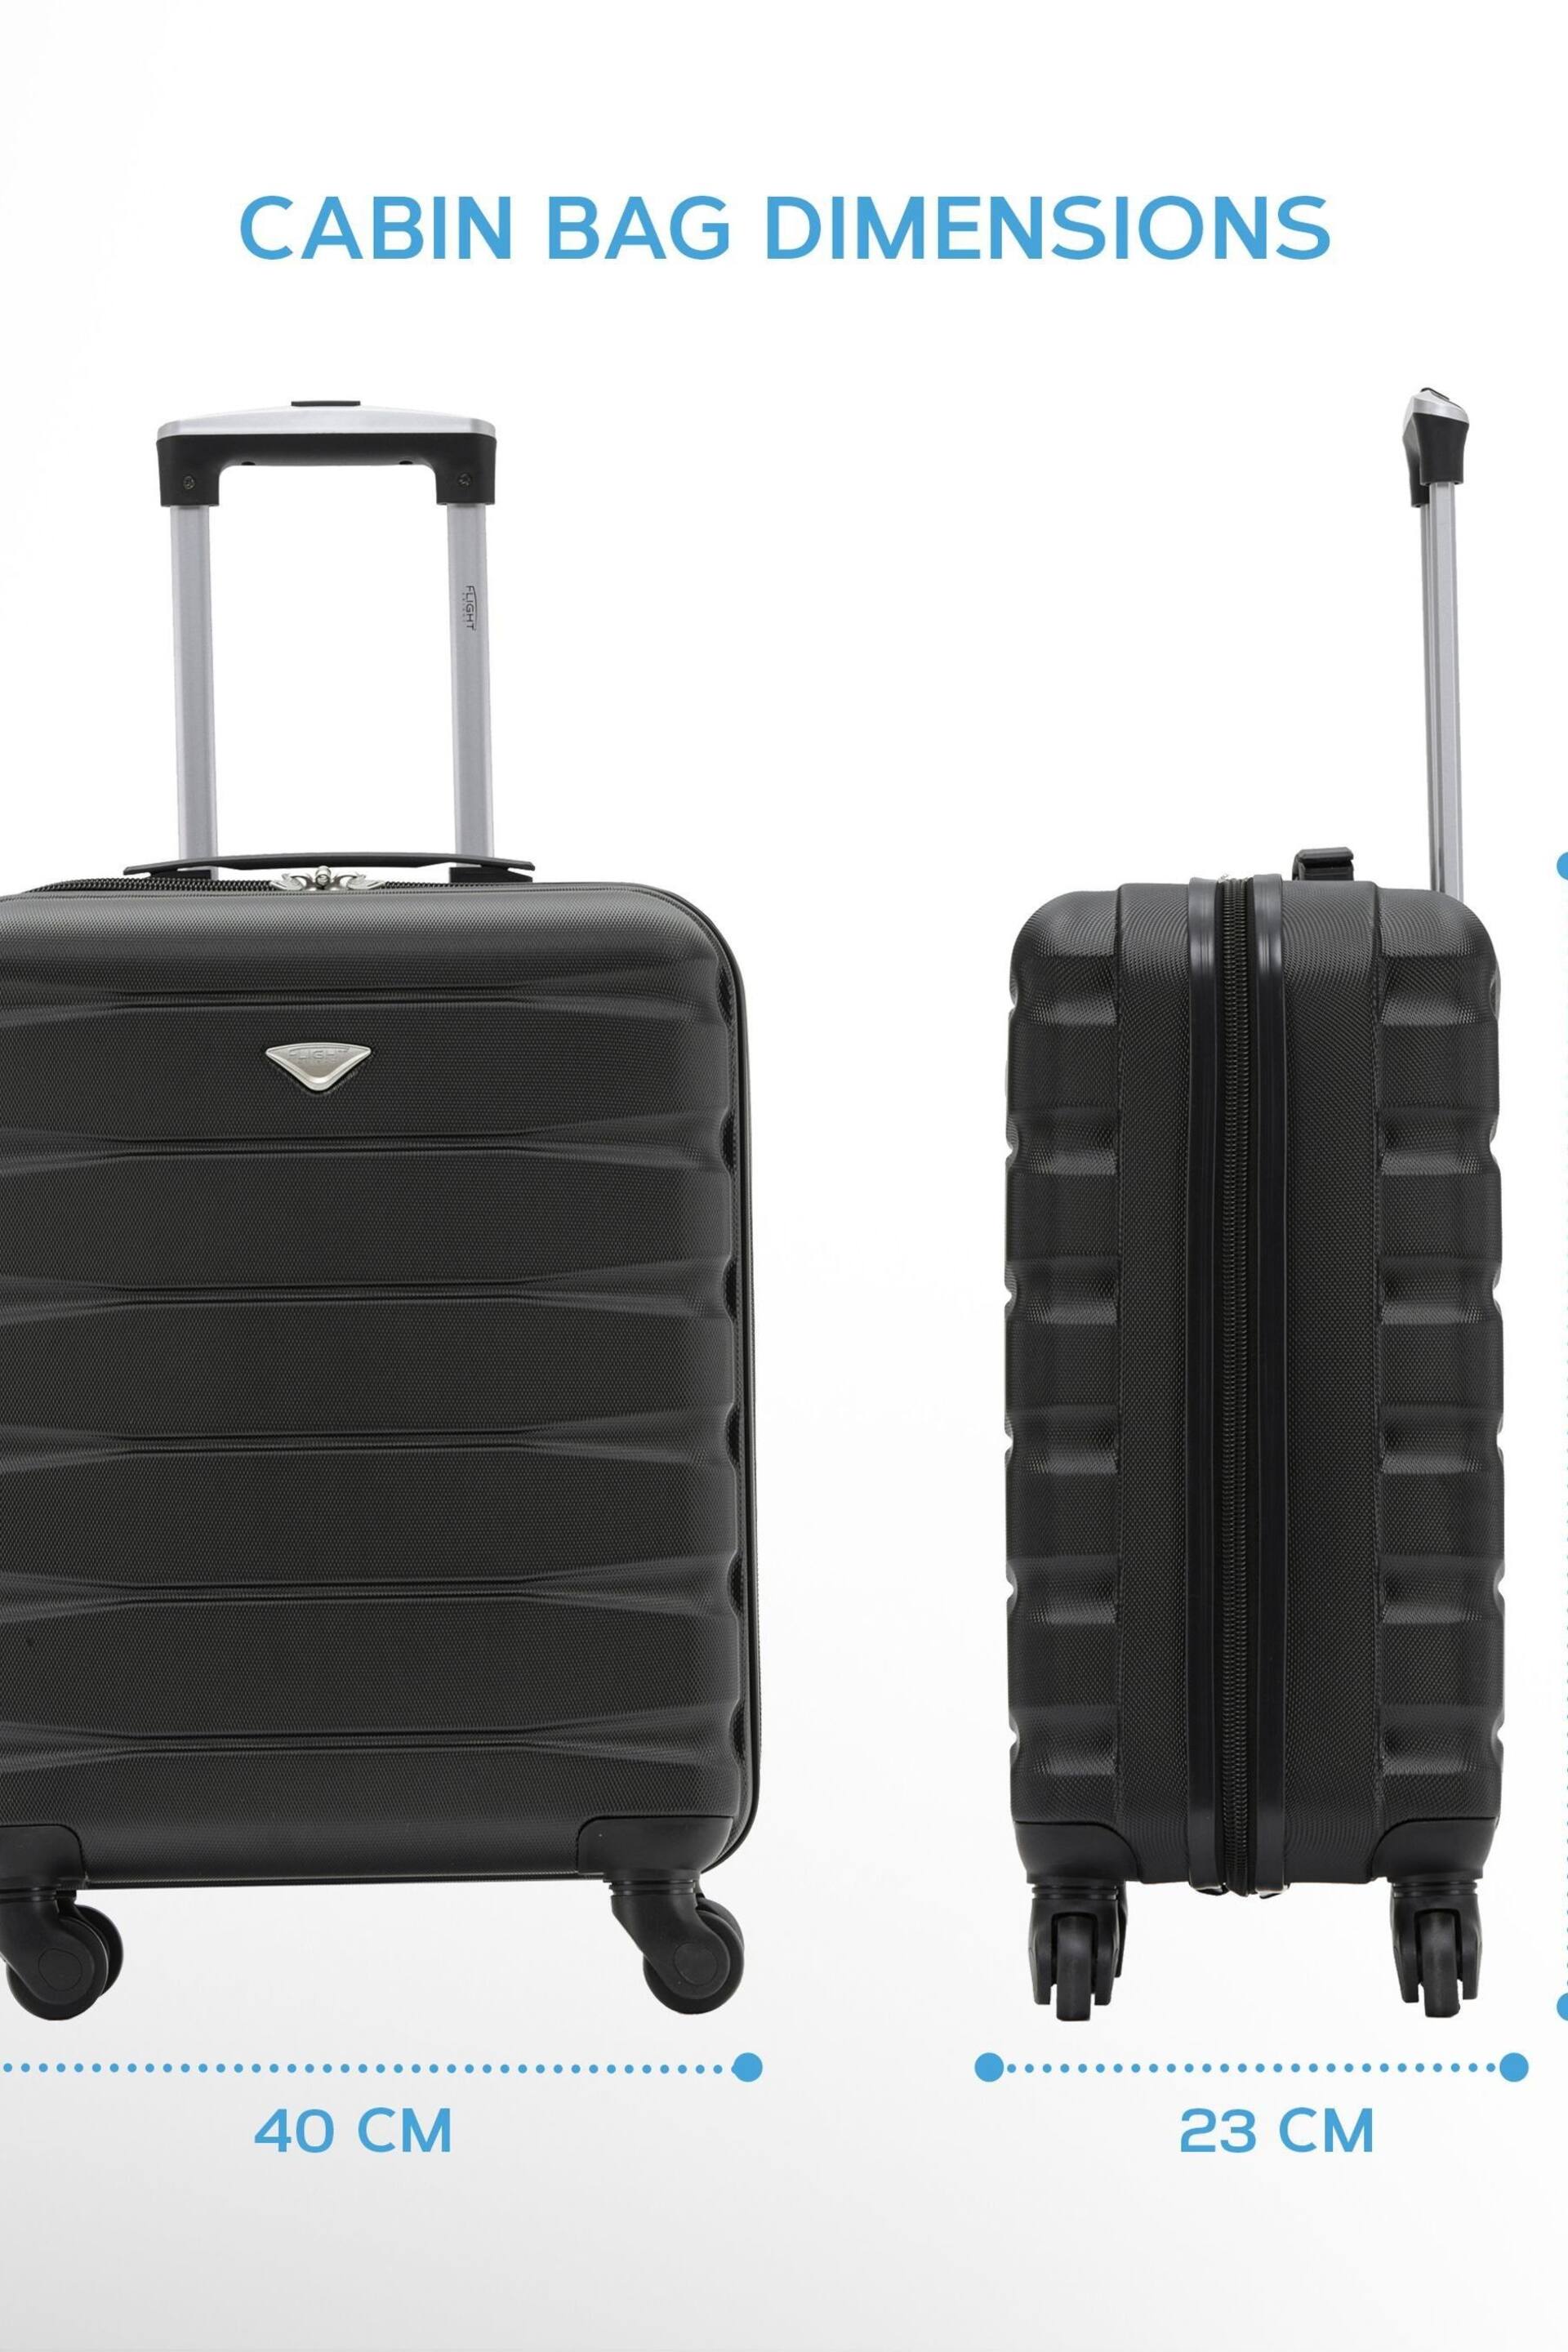 Flight Knight 55x40x23cm 4 Wheel ABS Hard Case Cabin Carry On Hand Black Luggage - Image 2 of 7